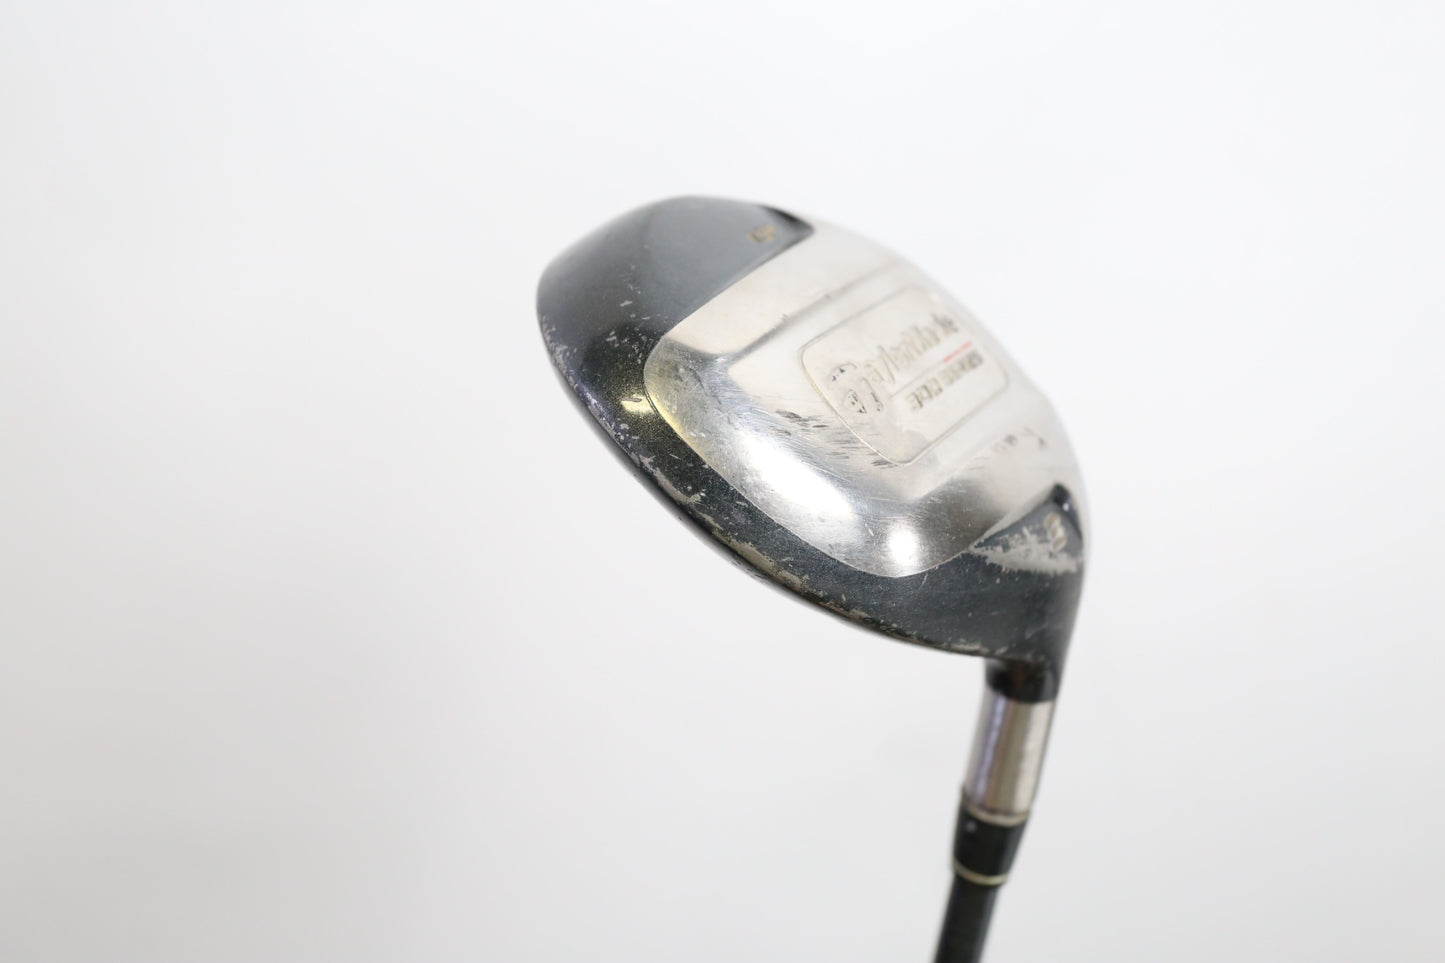 Used TaylorMade 300 Series 3-Wood - Right-Handed - 15 Degrees - Stiff Flex